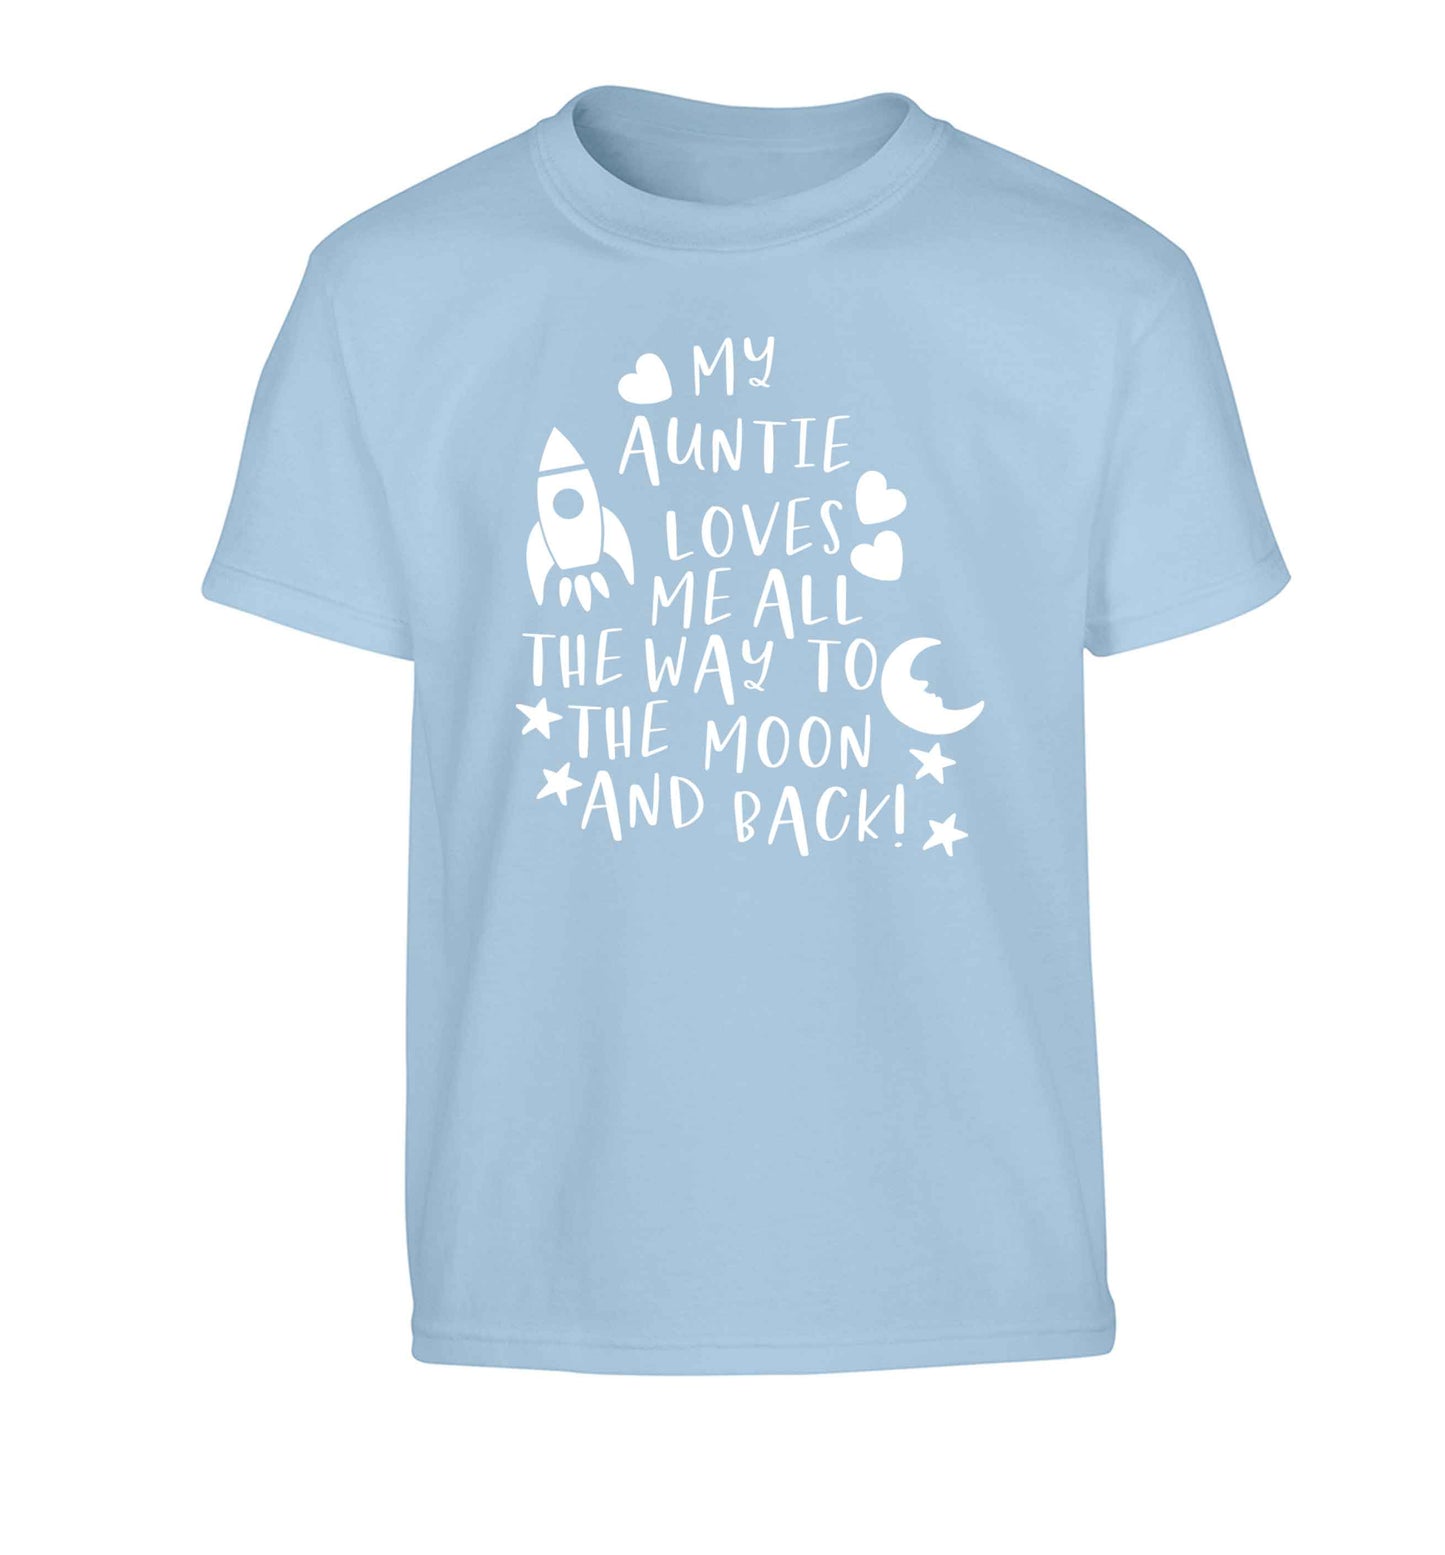 My auntie loves me all the way to the moon and back Children's light blue Tshirt 12-13 Years